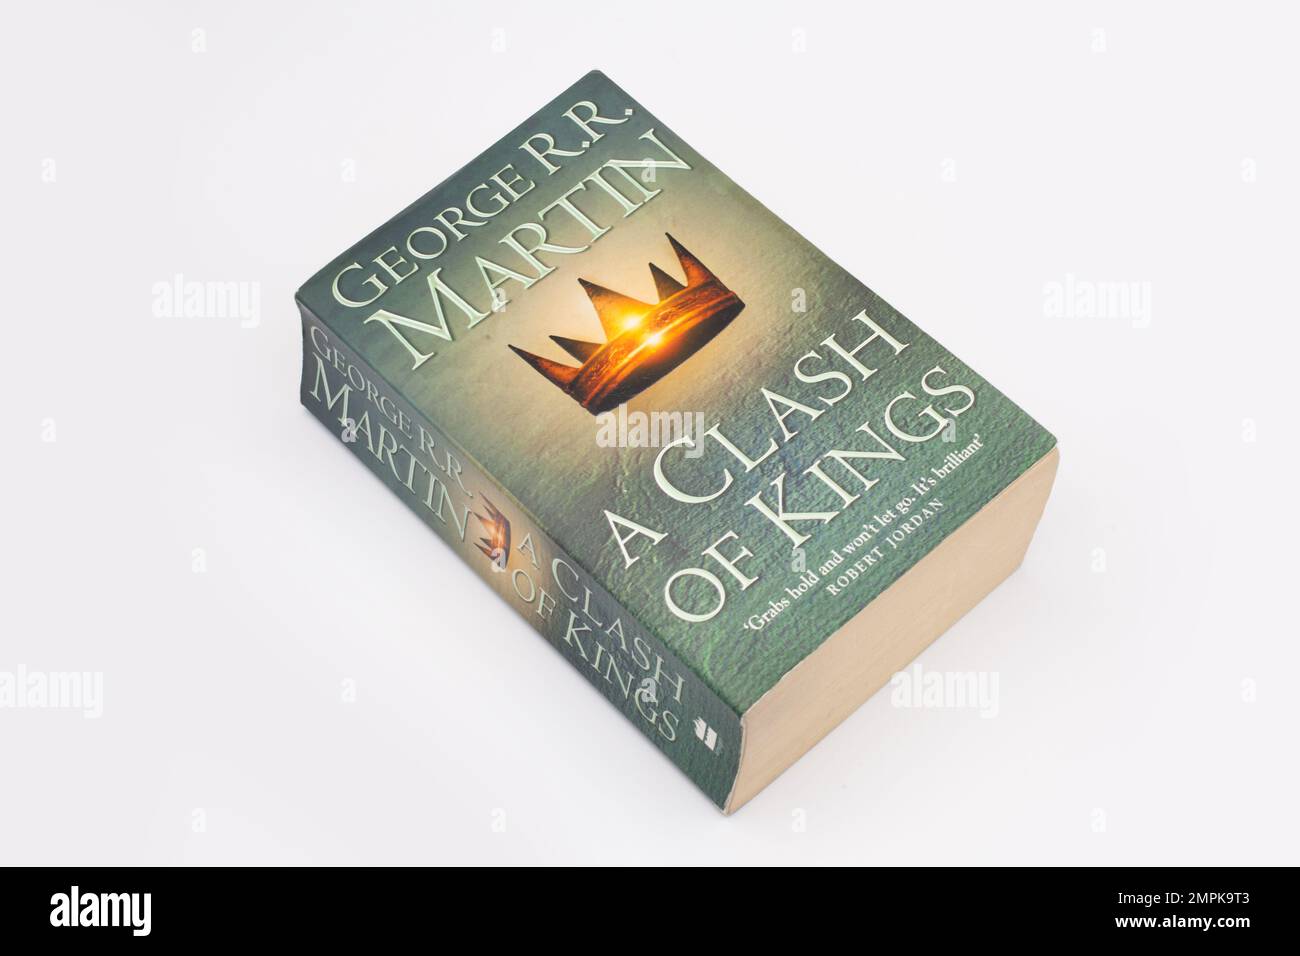 The book, A Clash of Kings by George R. R. Martin Stock Photo